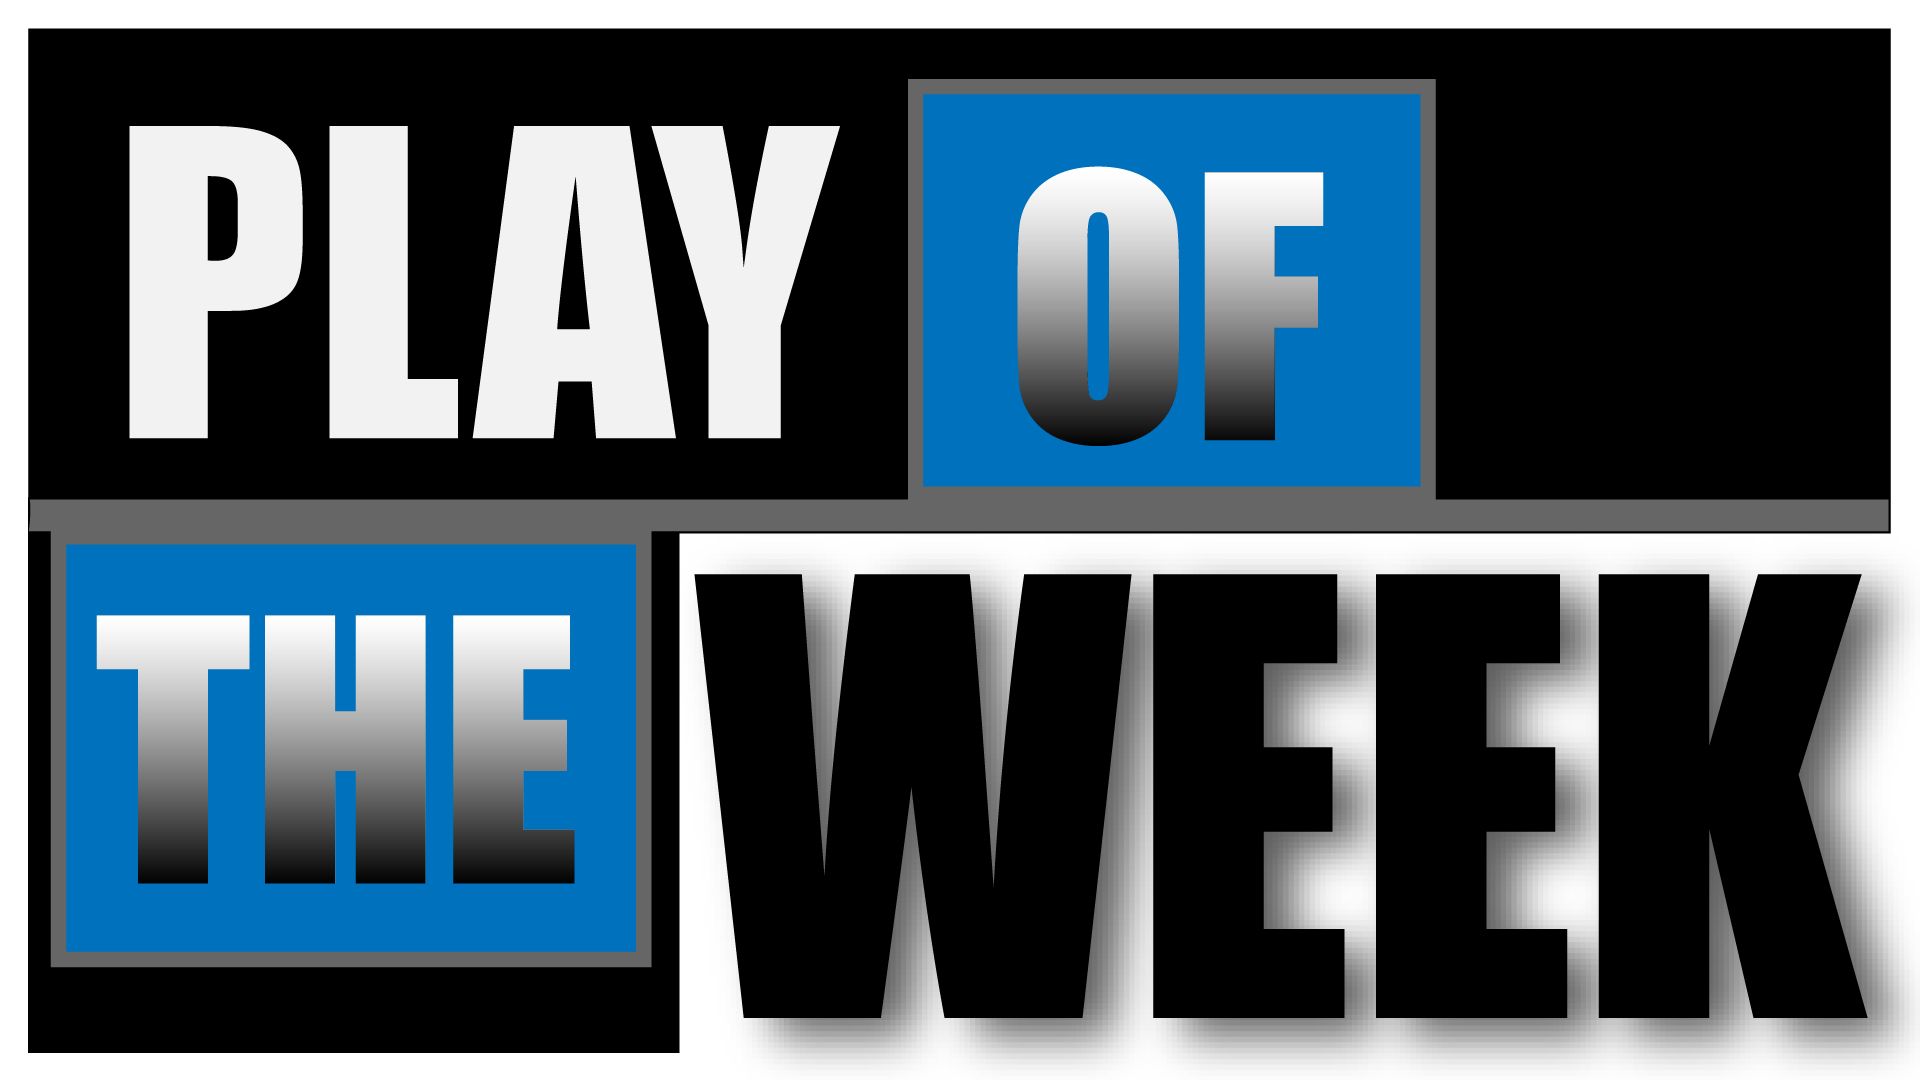 Play Of The Week Web 1920x1080